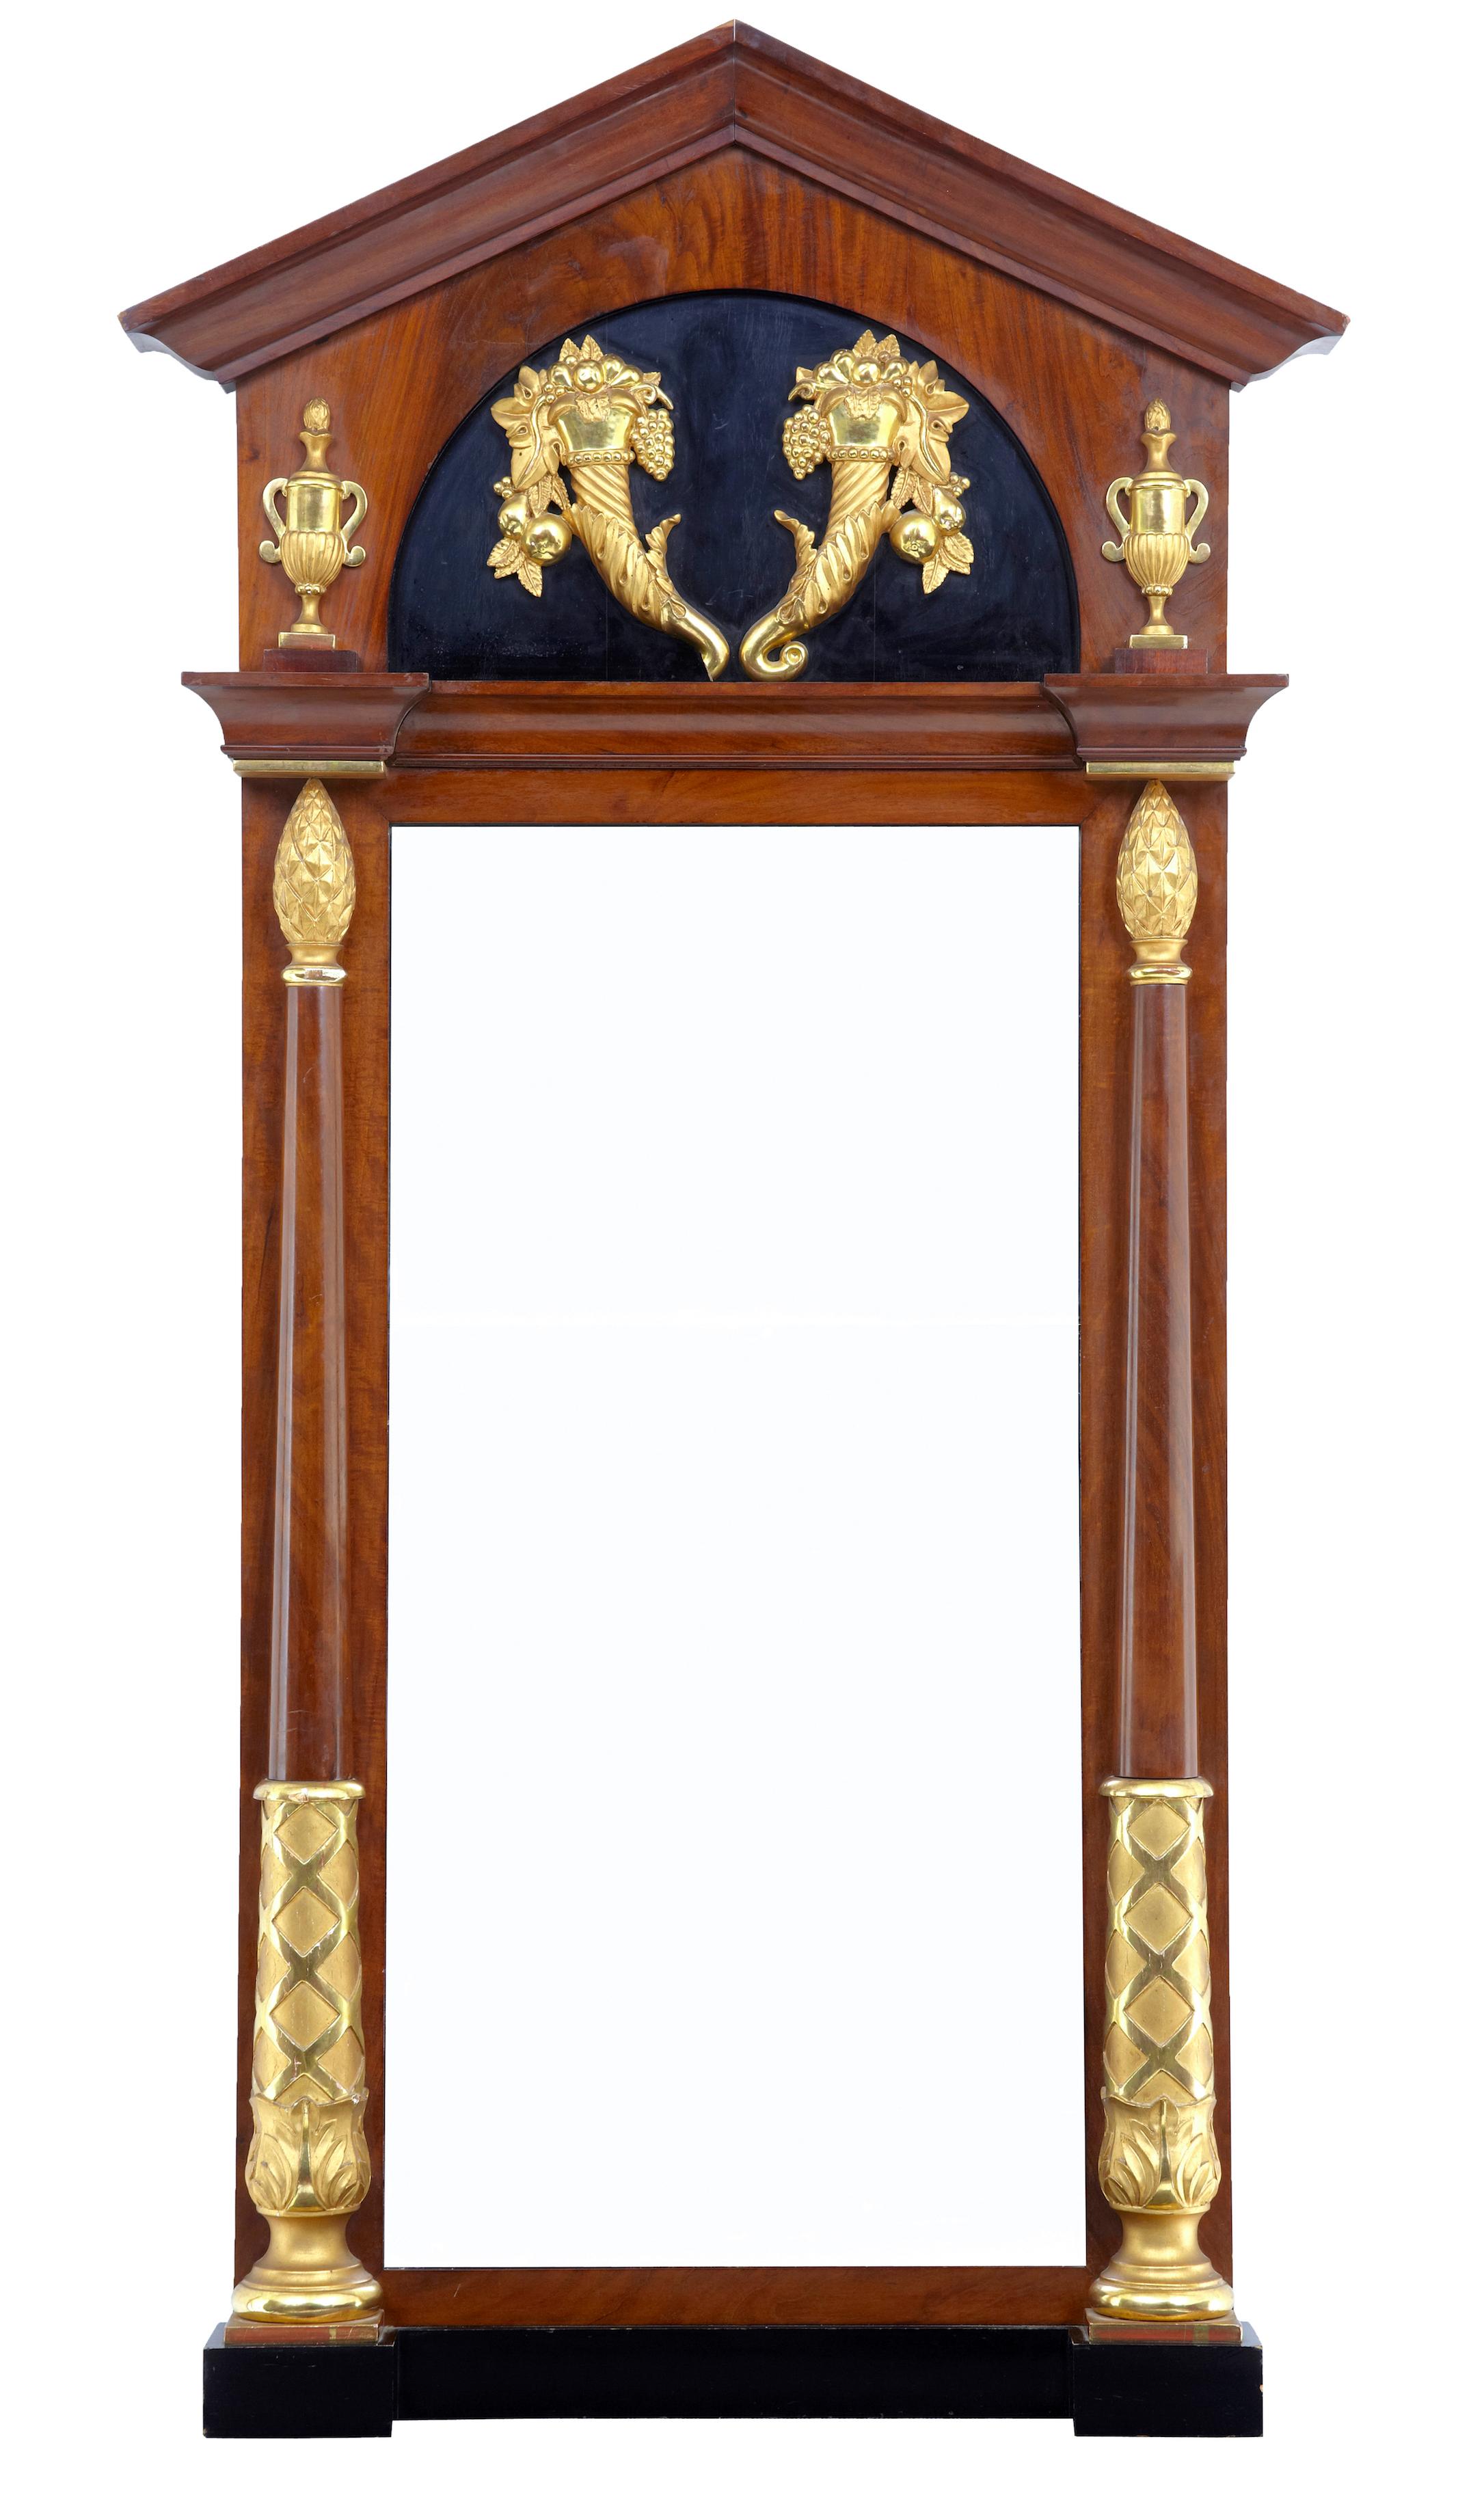 Stunning floor standing mirror.

Featuring carved gilt cornucopia, urns and pineapples. 

Lovely mahogany patina on this 100% original piece. 

Minor loss to one of the cornucopias which can be restored if customer requires.